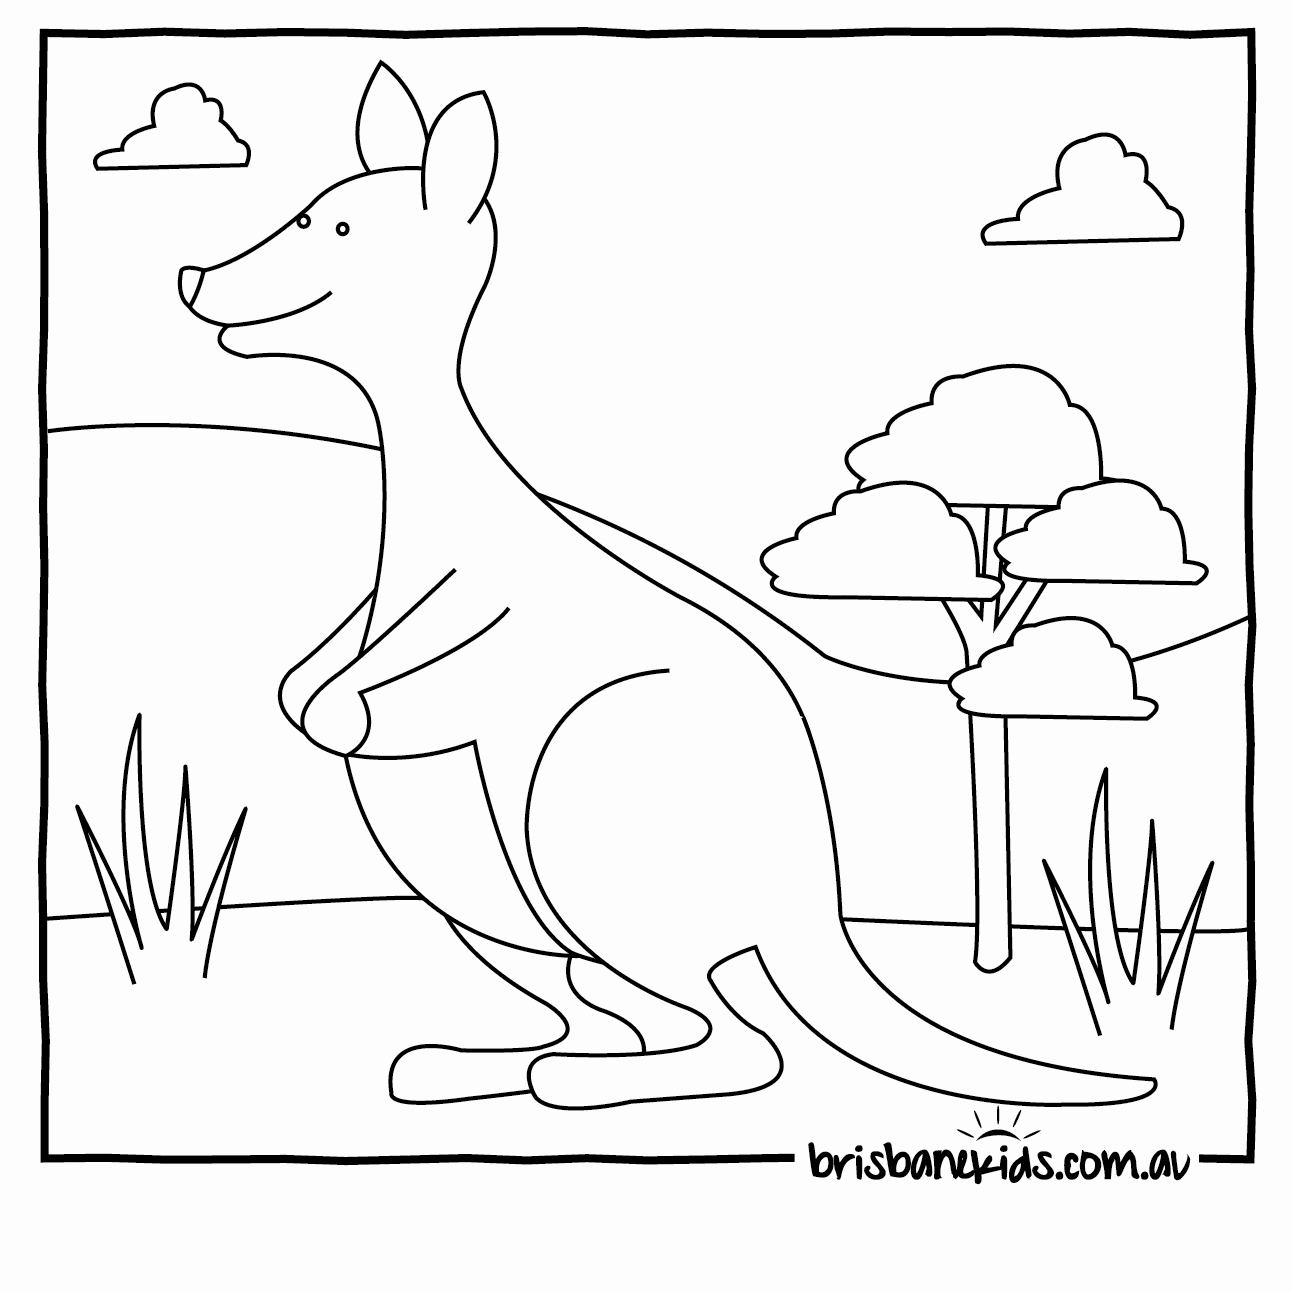 Animal Pictures to Color Luxury Australian Animals Colouring Pages • Brisbane Kids